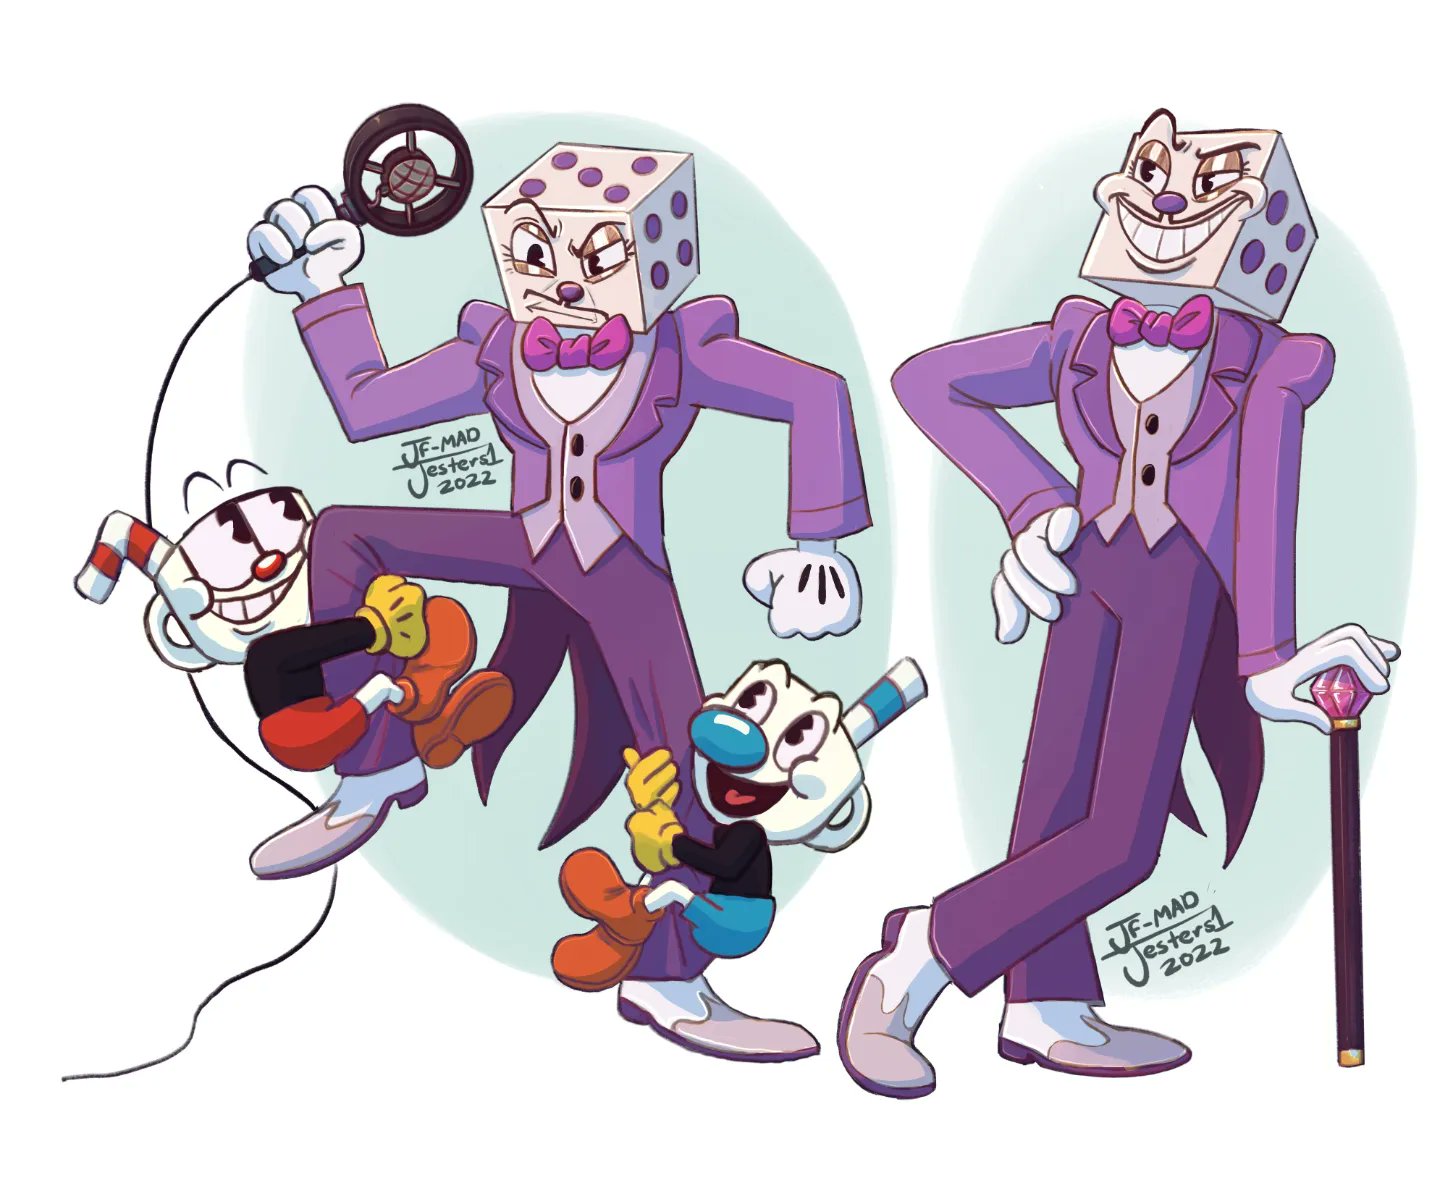 JanetF_Madjesters1 on X: King Dice and some cups. ❤ #cupheadshow